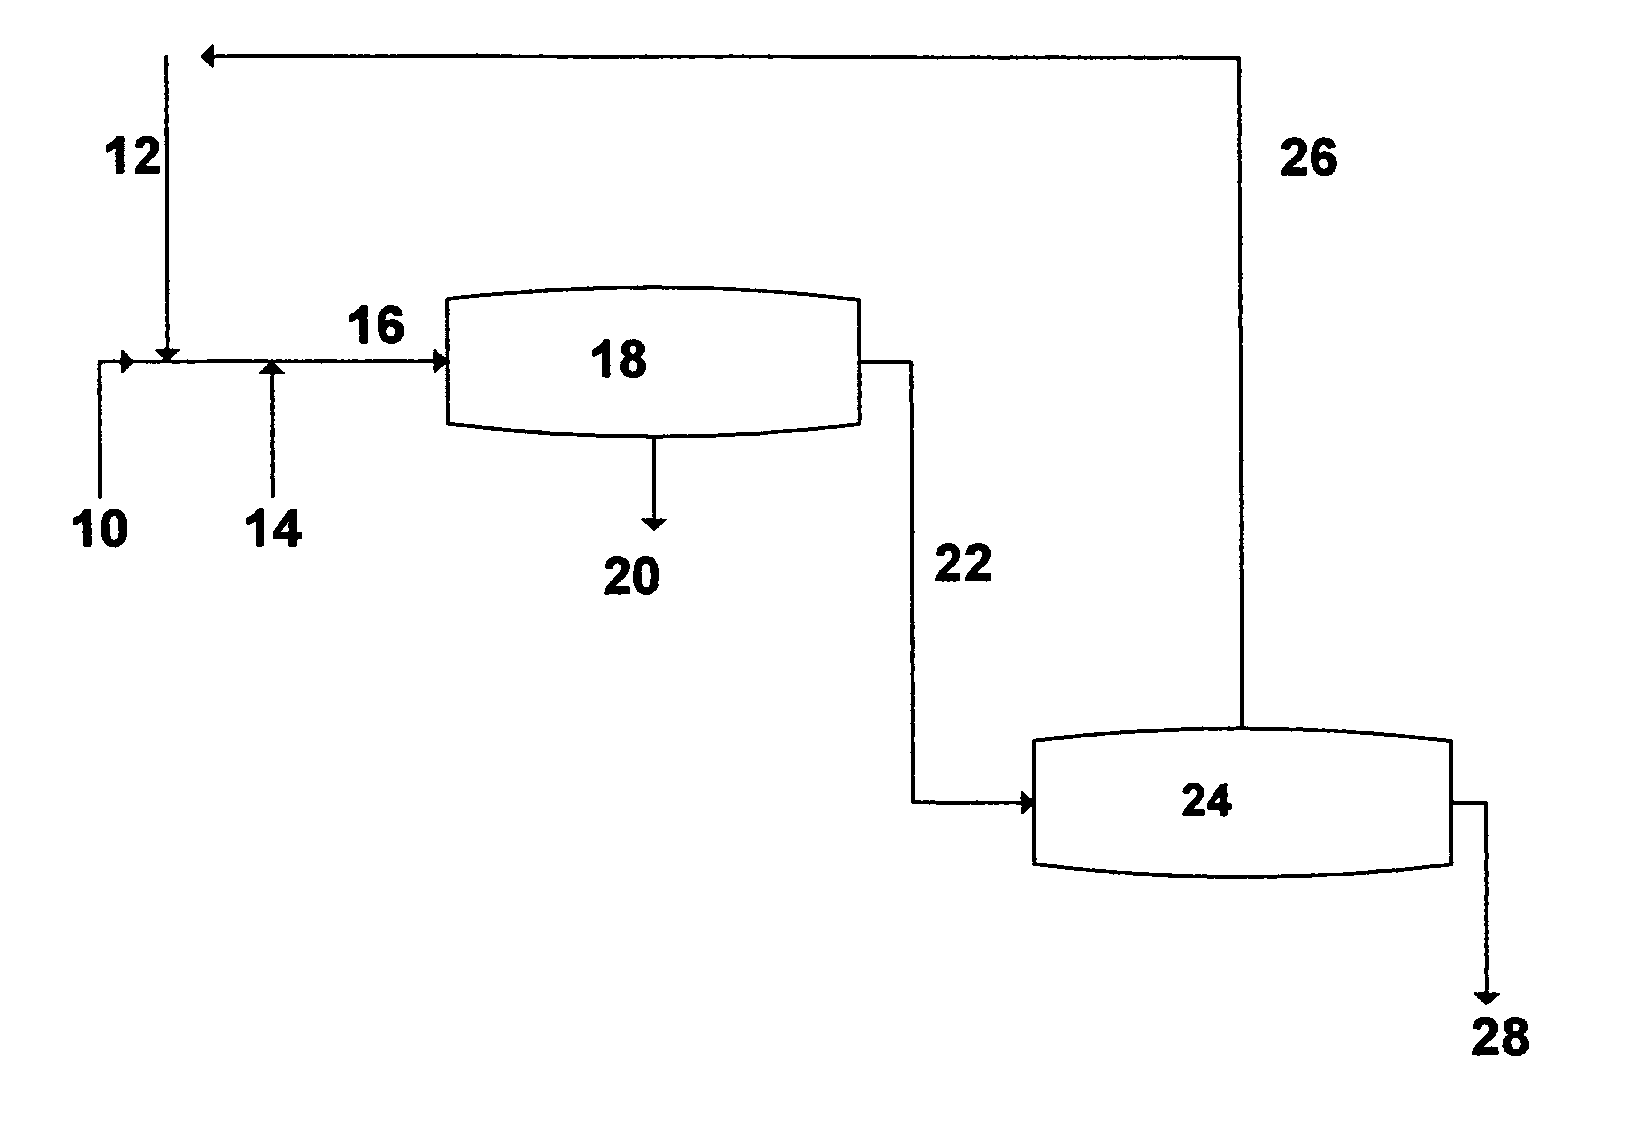 Methods to properly use saline water for oil reservoirs injection operations